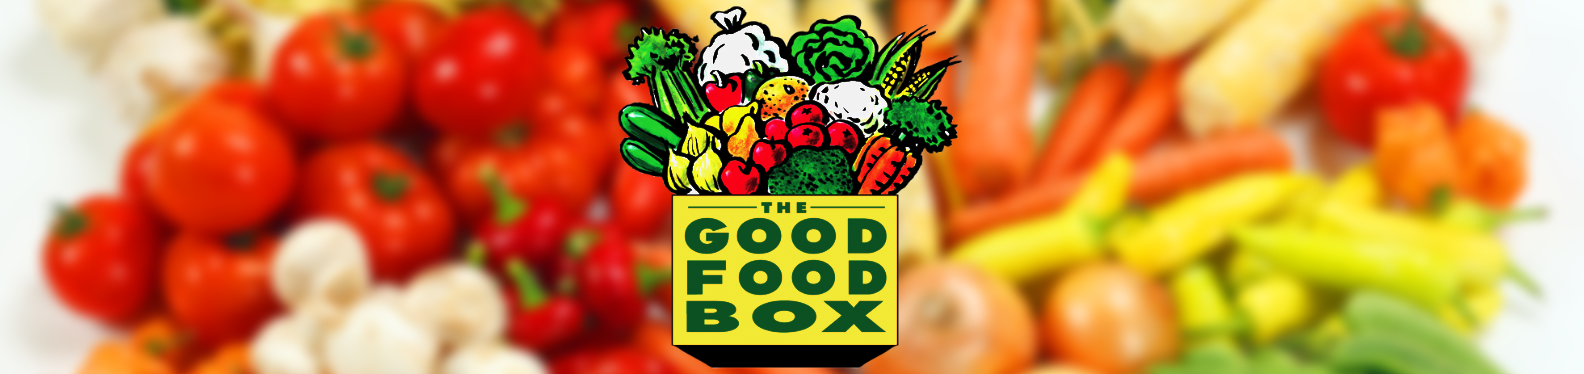 Banner showing vegetables with  text: the good food box